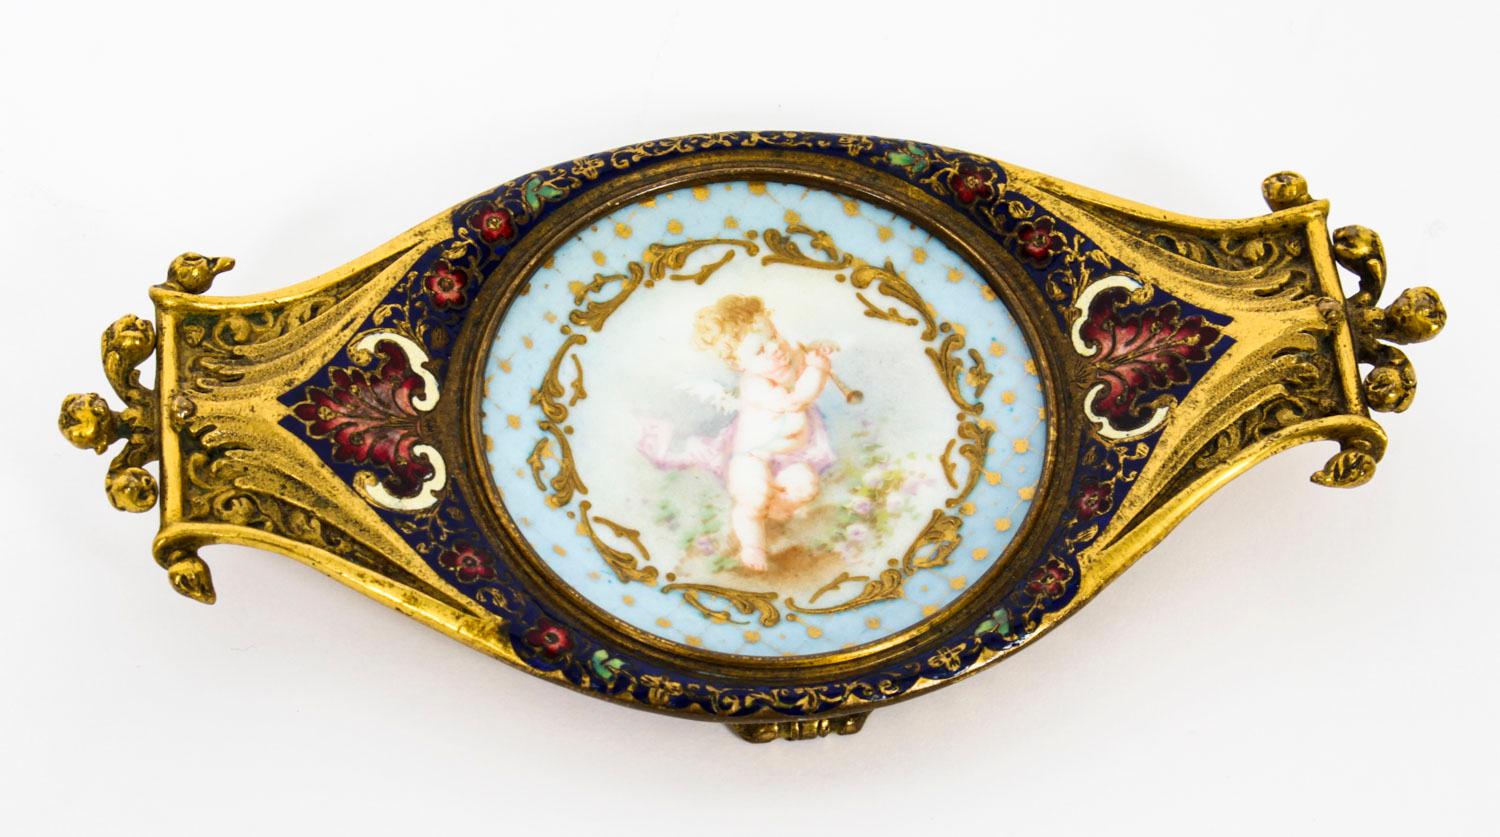 A really beautiful French ormolu, champlevé enamel and Sèvres Porcelain pin tray, circa 1880 in date.

The ormolu and champleve border is set with a charming hand painted winged cherub on a bleu celeste ground with gilt highlights. 

Add this